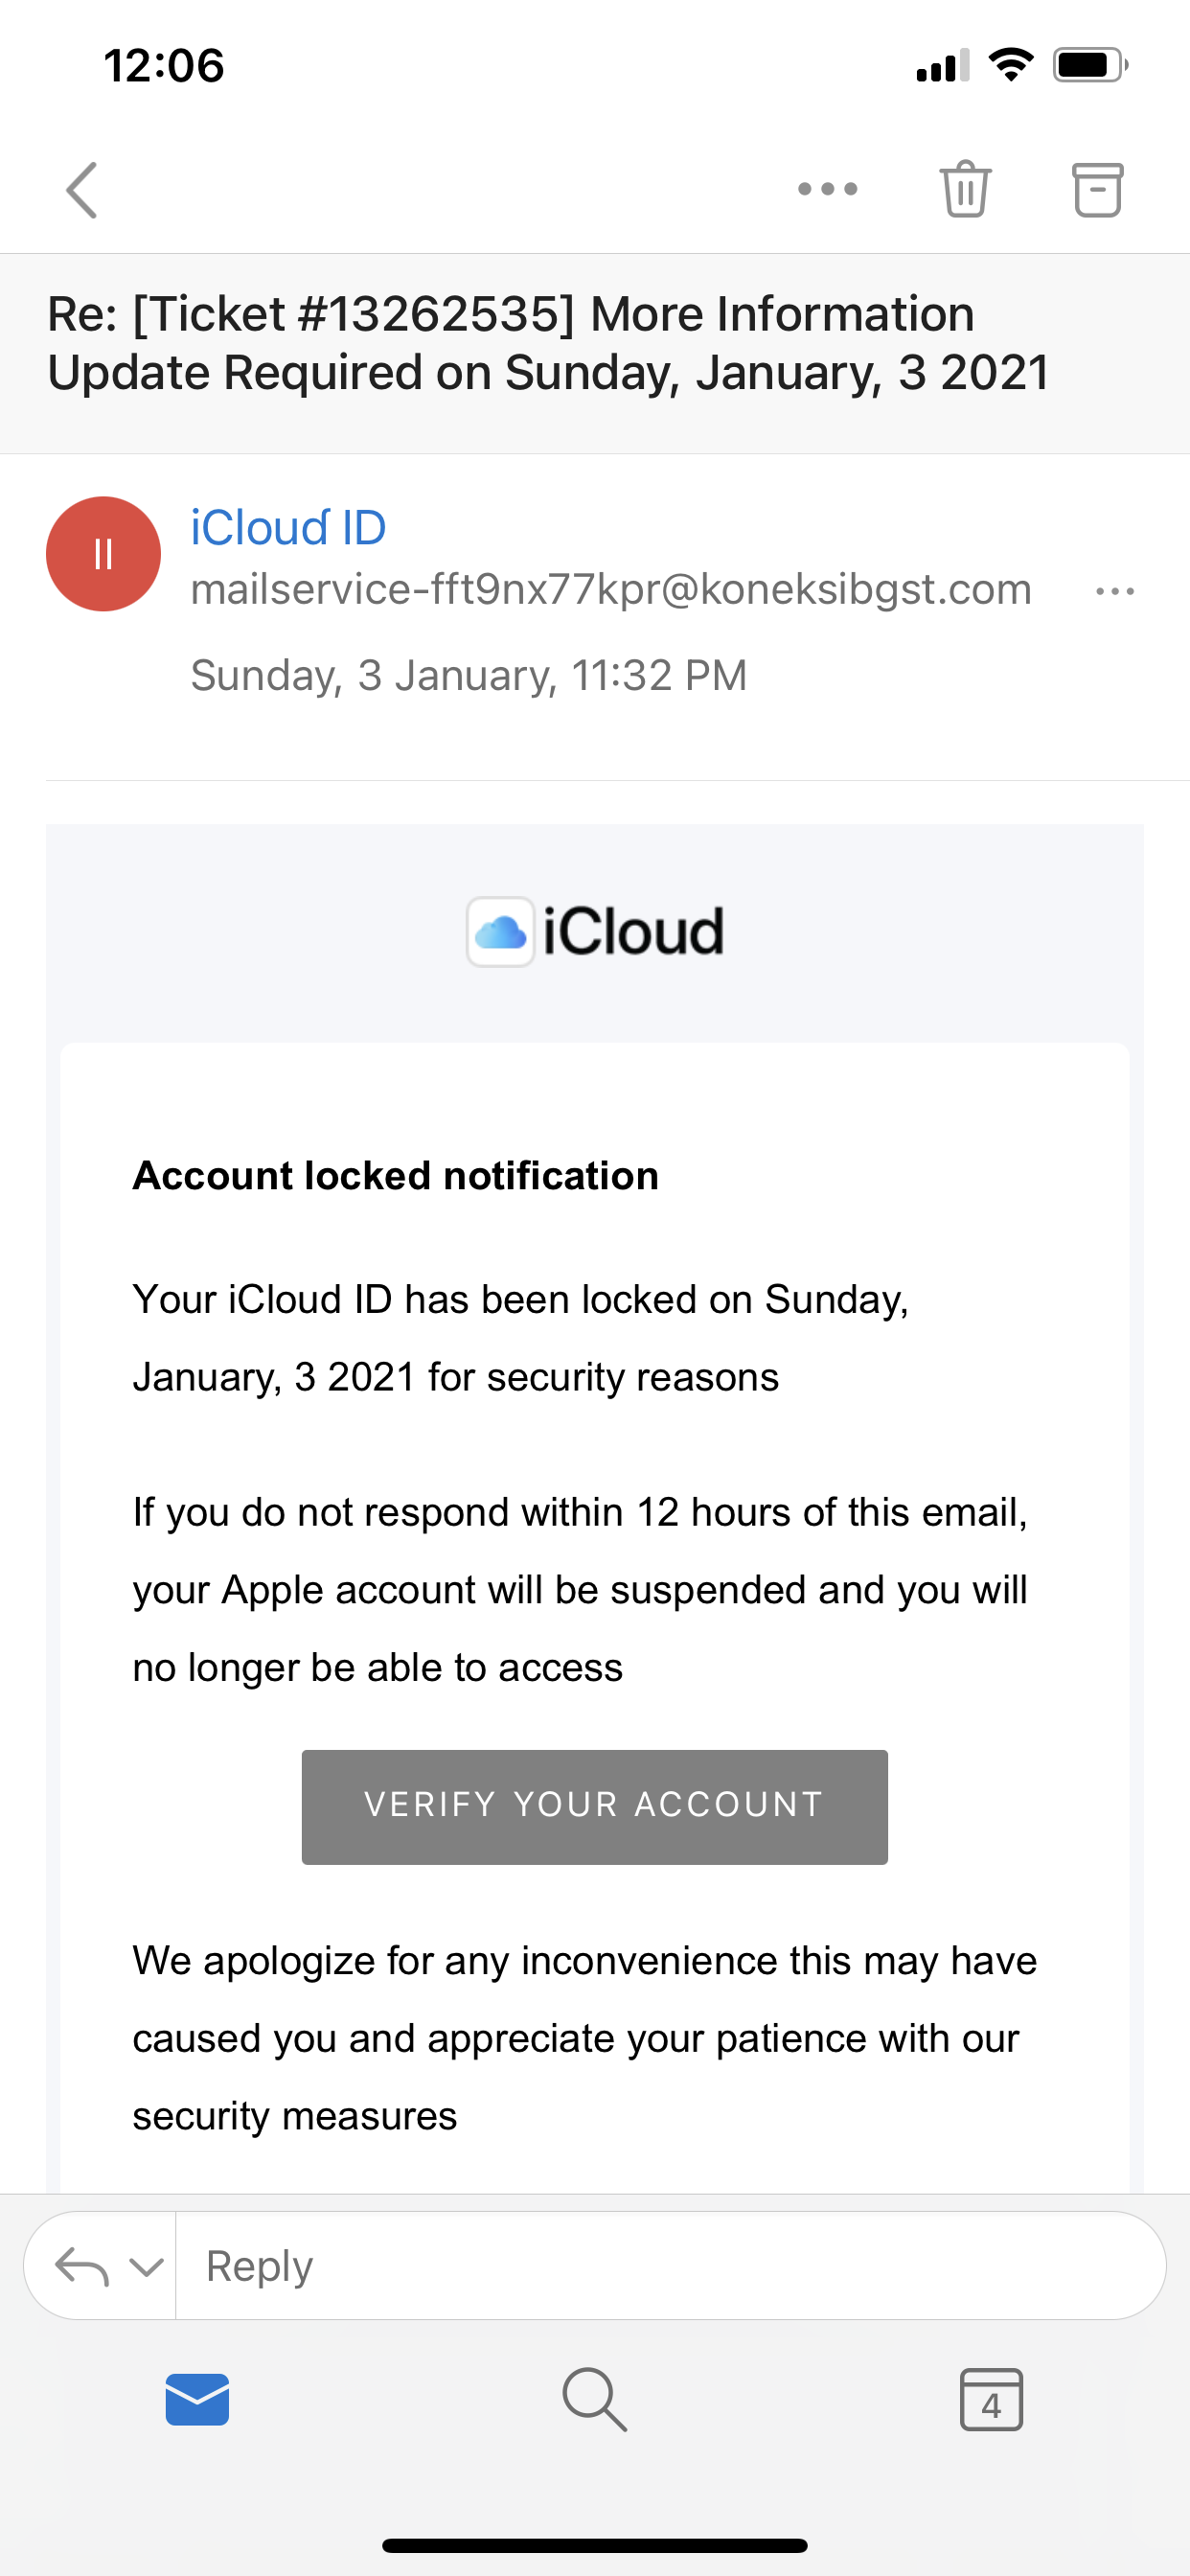 How to Find Someone's iCloud Email - GadgetMates